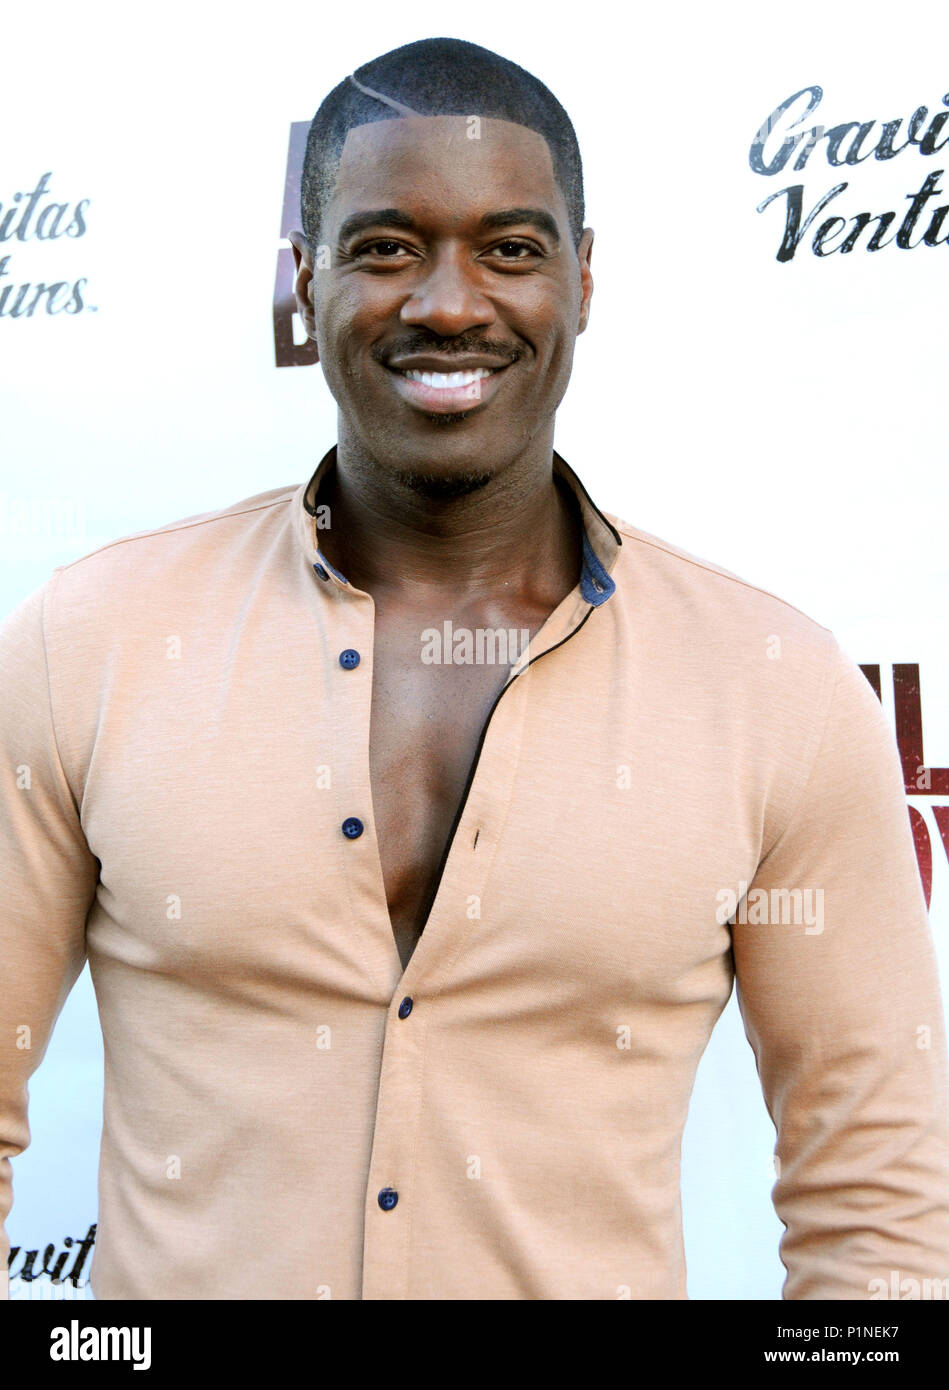 Beverly Hills, California, USA. 12th June, 2018. Actor Terell Carter attends the Los Angeles Premiere of 'Billy Boy' on June 12, 2018 at Laemmle Music Hall in Beverly Hills, California. Photo by Barry King/Alamy Live News Stock Photo